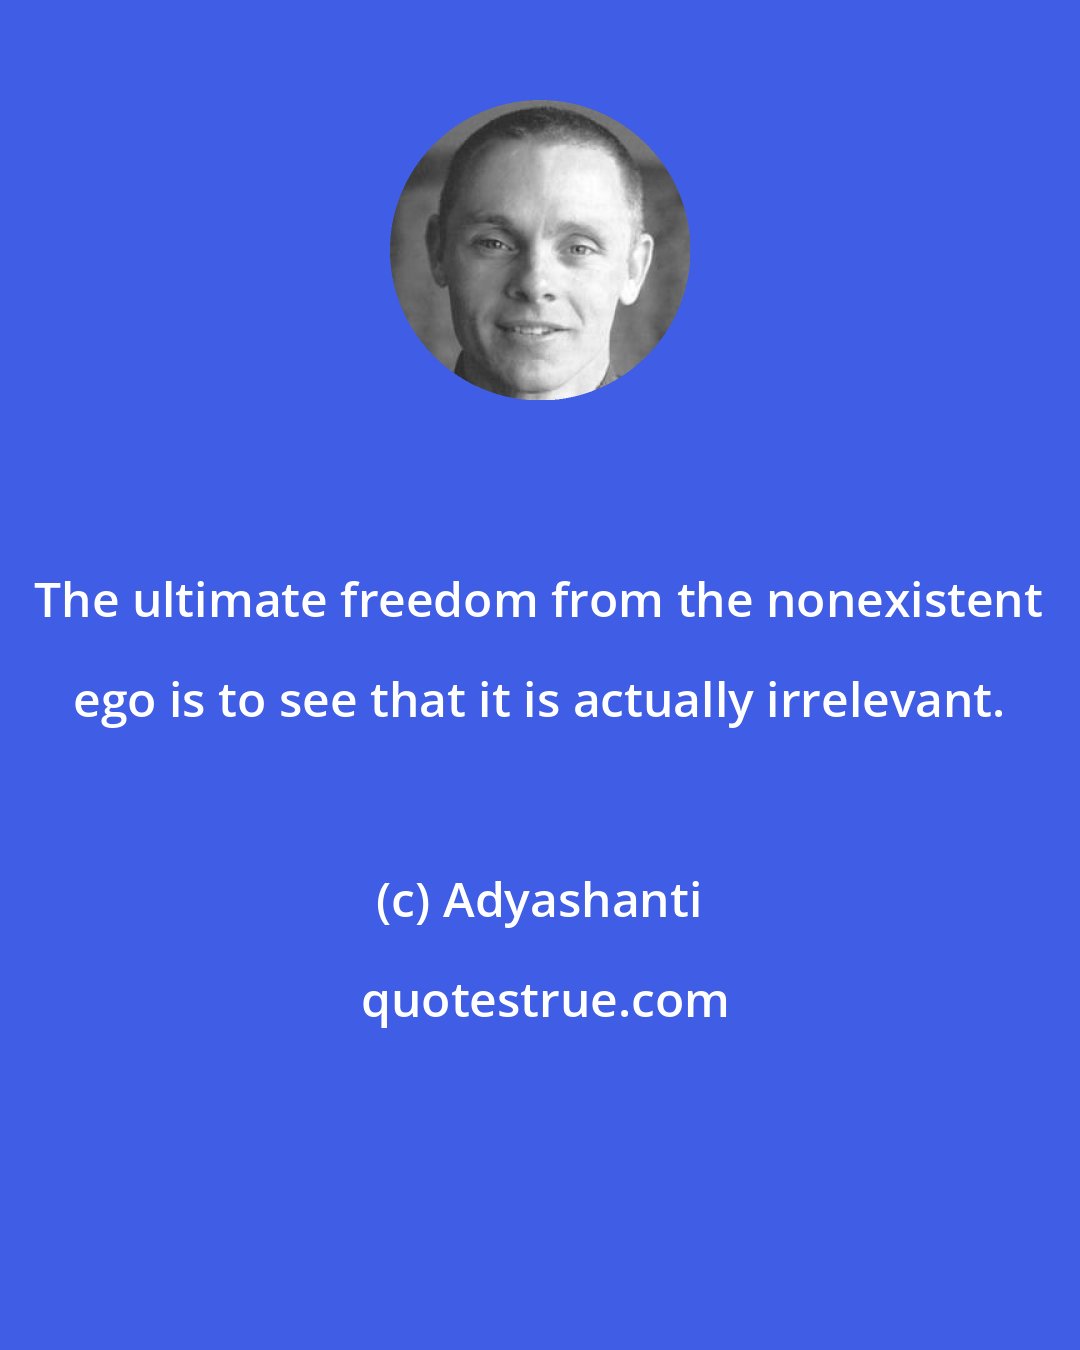 Adyashanti: The ultimate freedom from the nonexistent ego is to see that it is actually irrelevant.